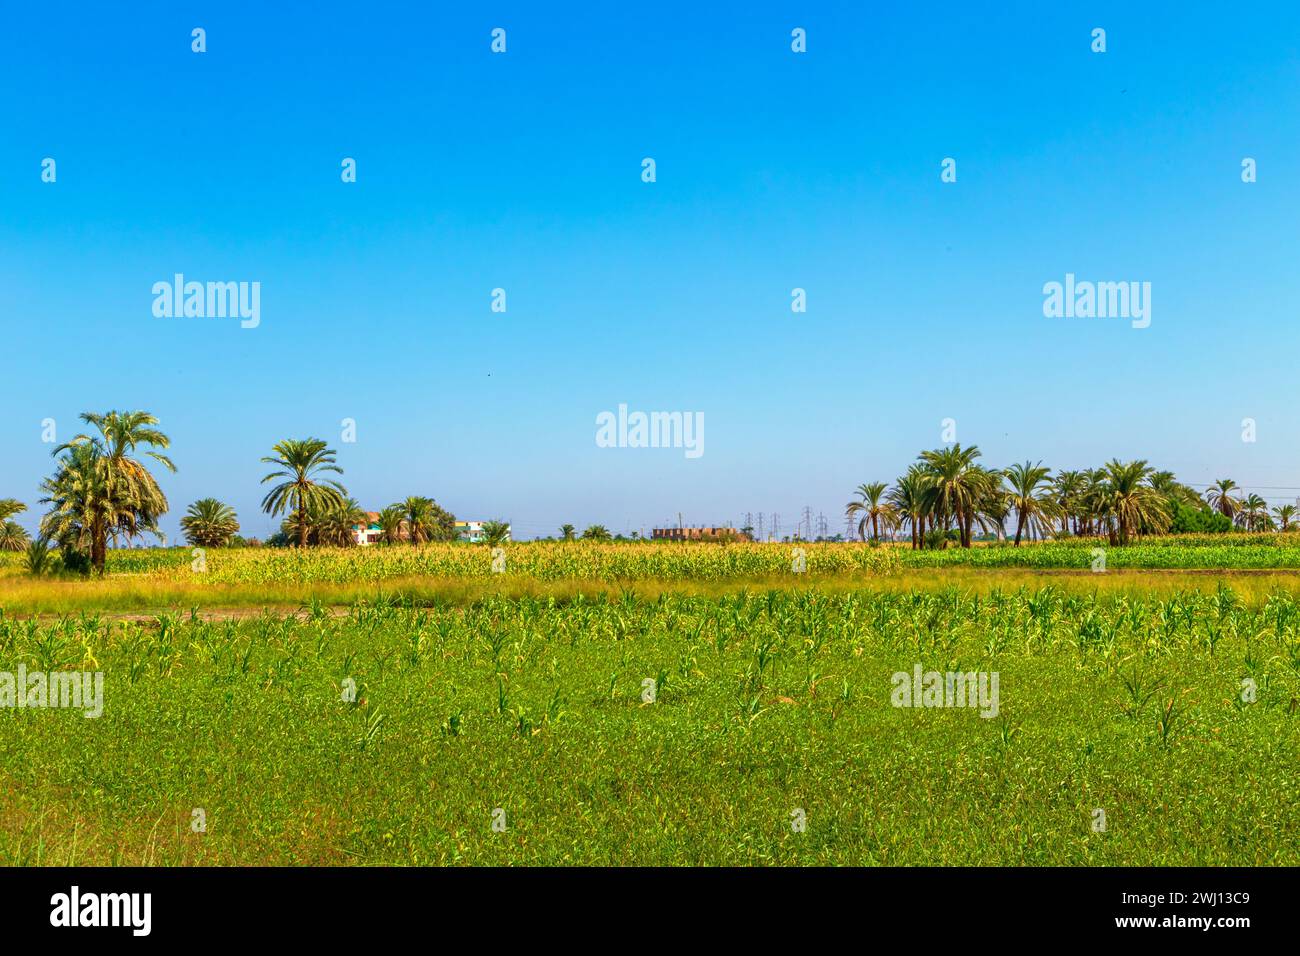 Cultivated fields on the Nile River. Landscape with palm trees and corn. Stock Photo